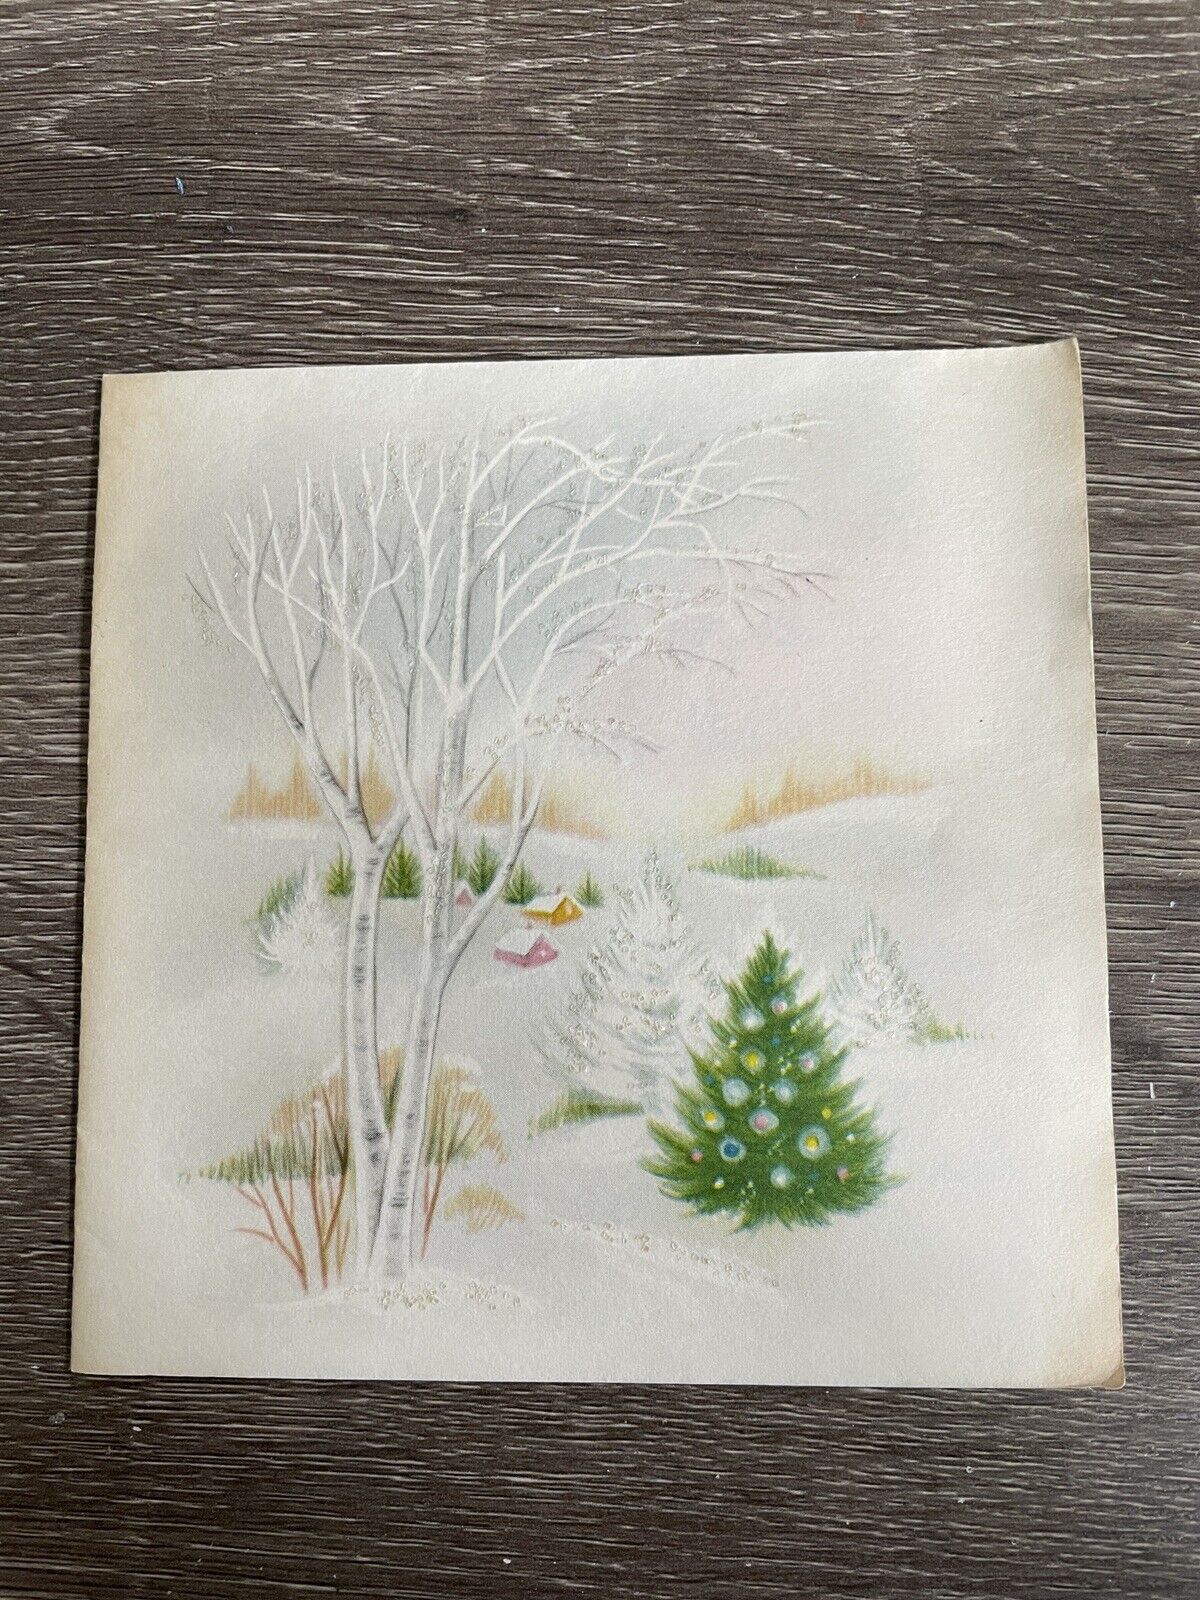 Vintage Christmas Card, Birch wood Tree Forest Flocked Snow Norcross, Used